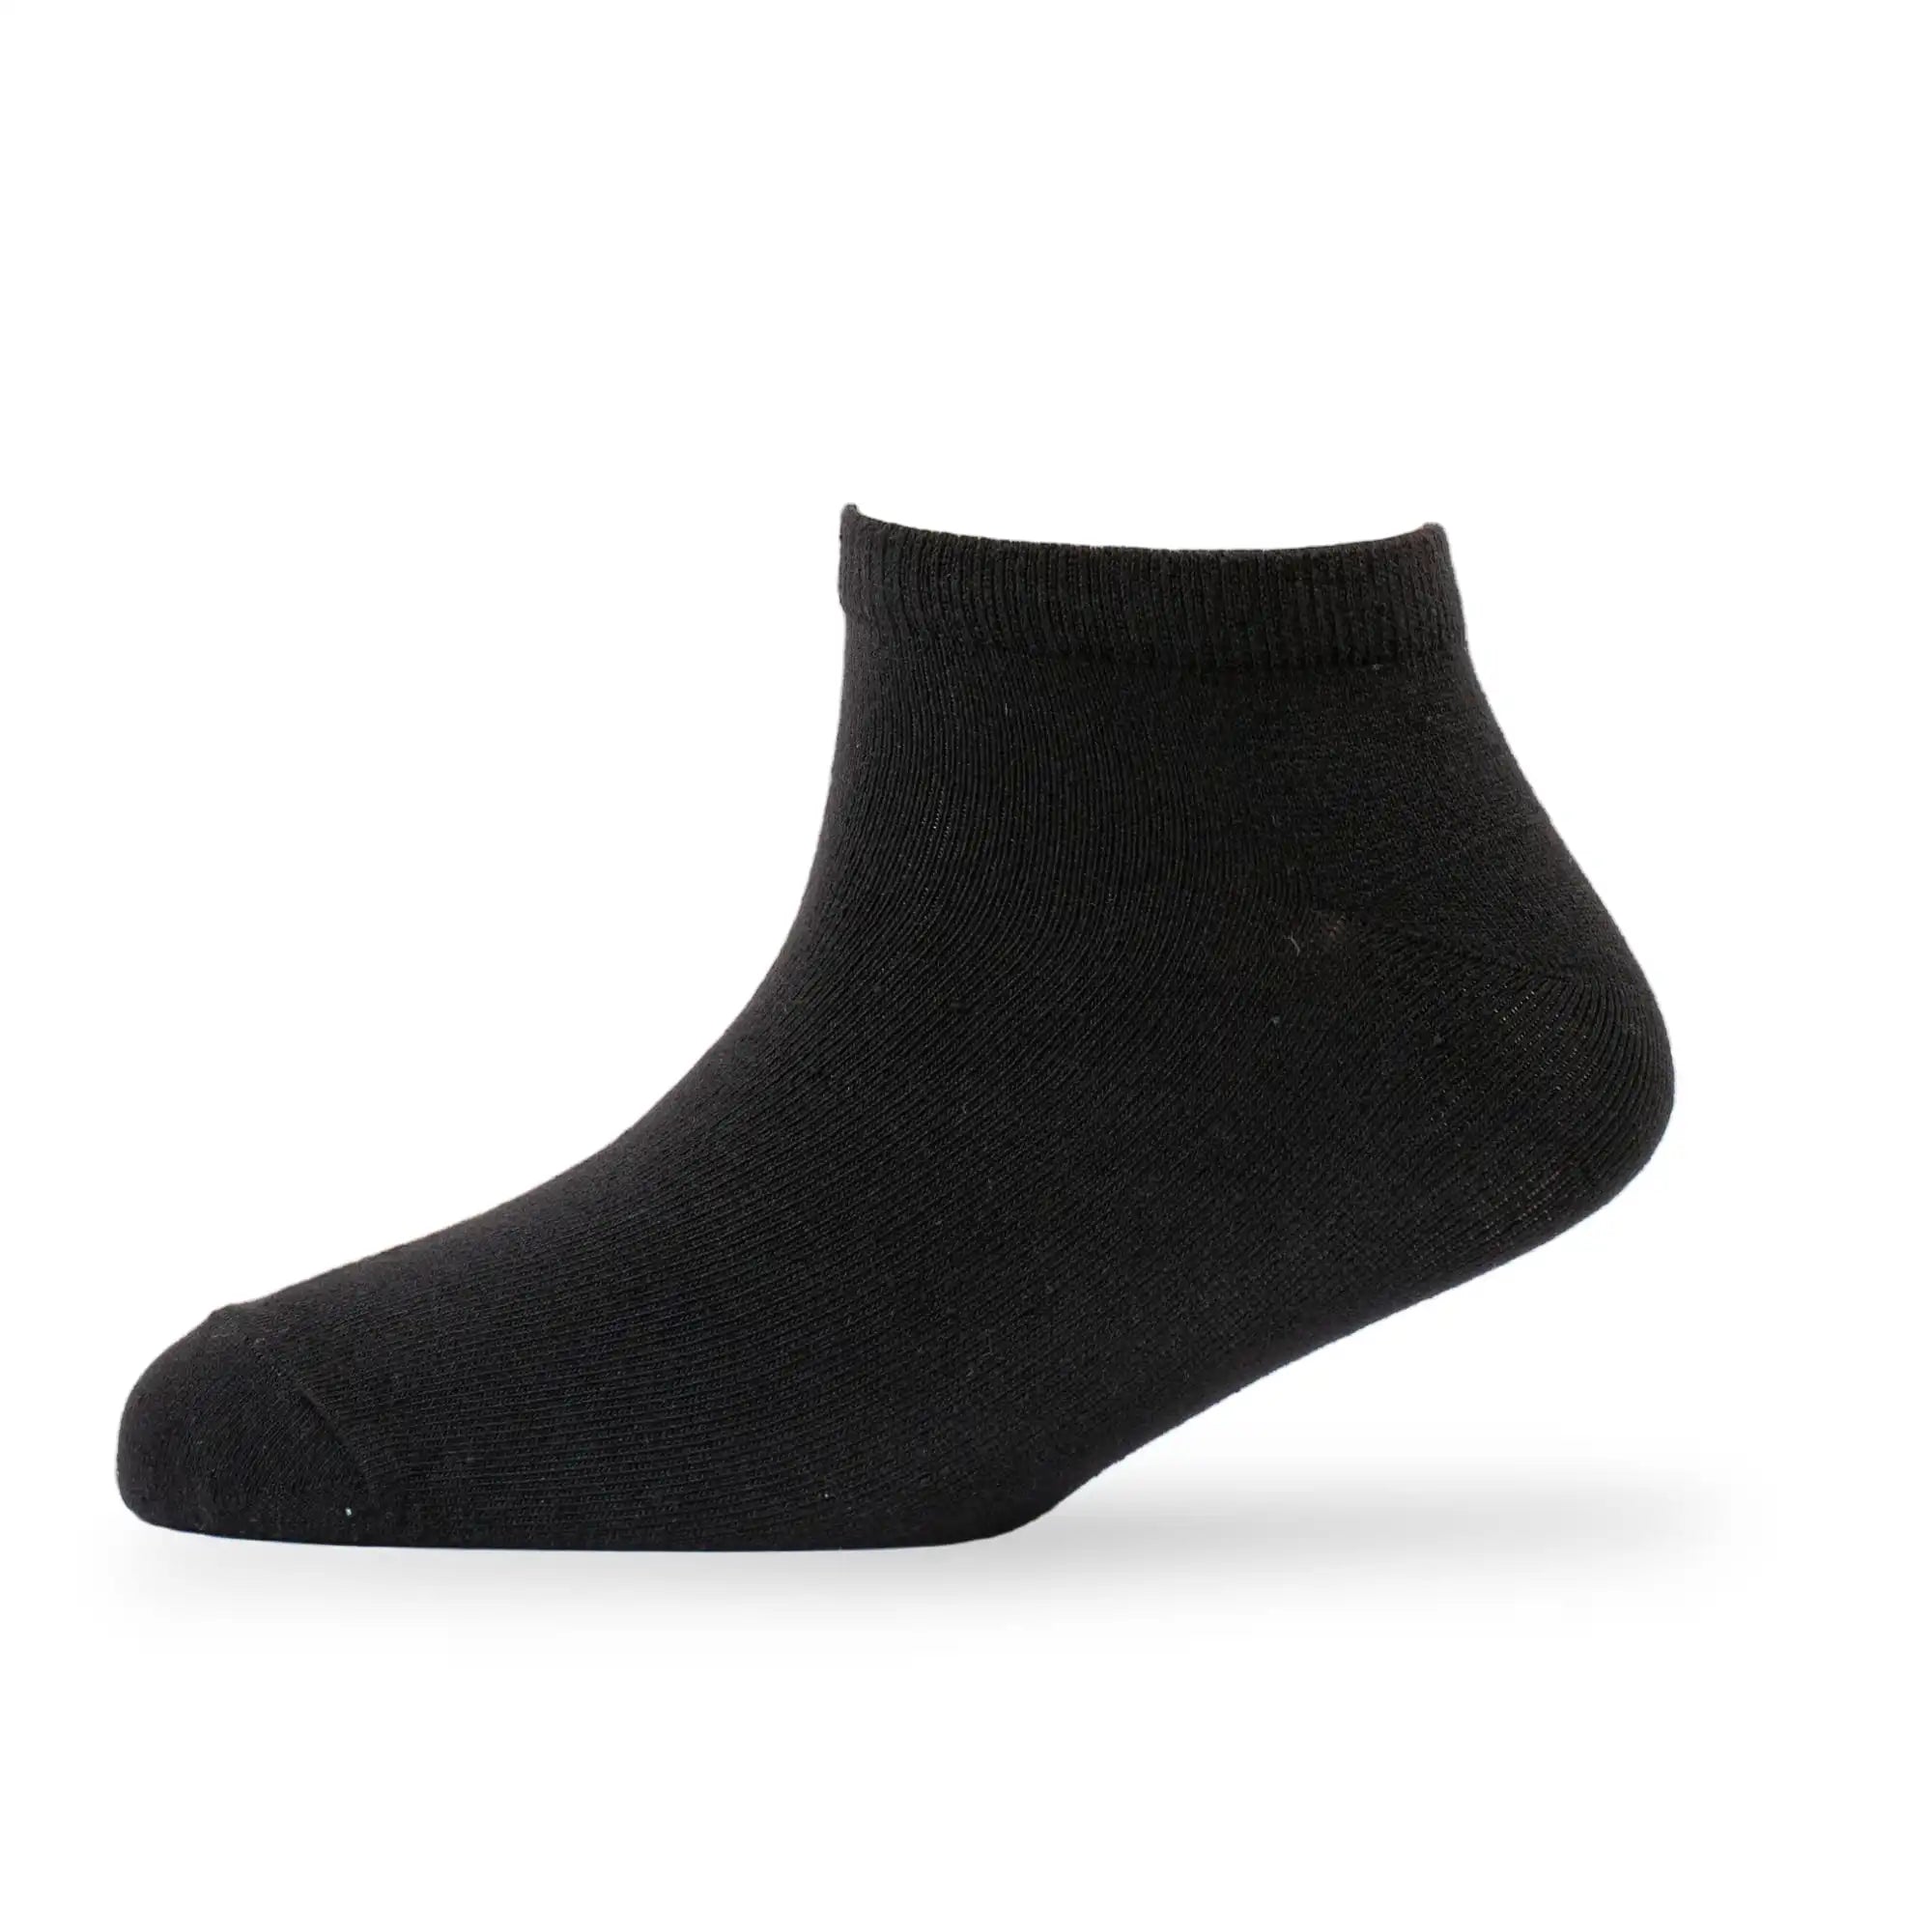 Young Wings Men's Black Colour Cotton Fabric Solid Low Ankle Length Socks - Pack of 5, Style no. 1100-M1